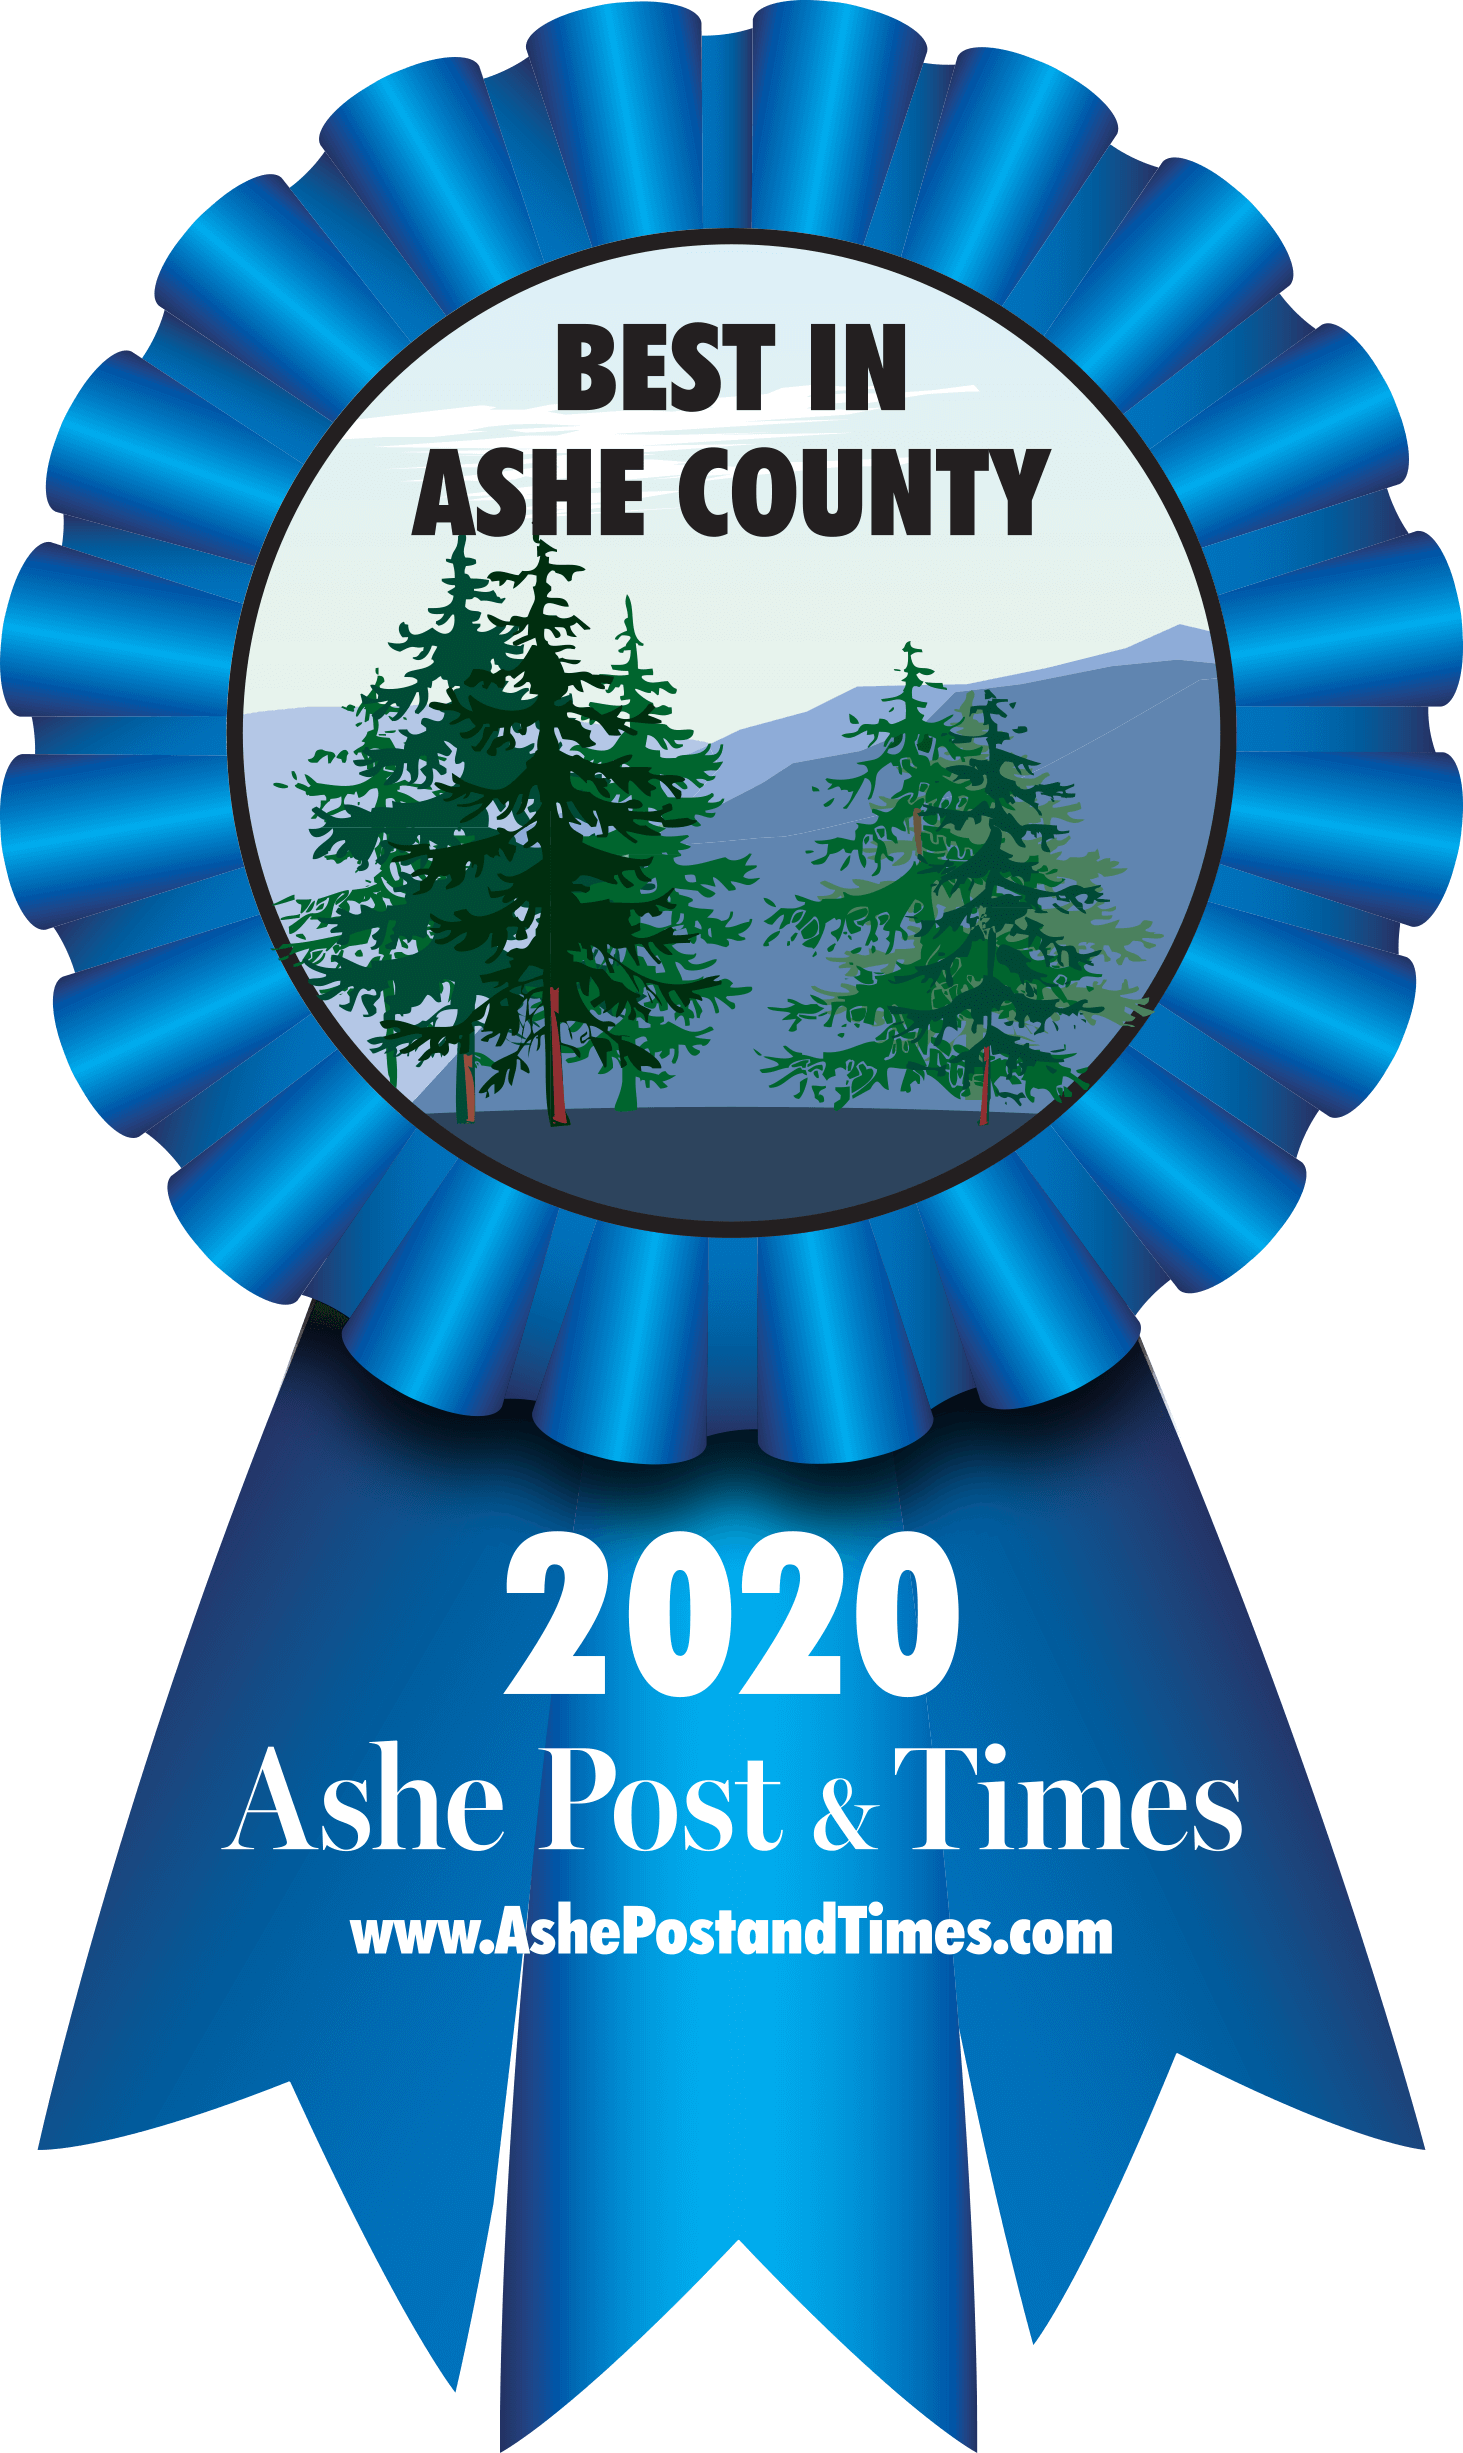 Voted 2019 Best Home Builder in Ashe Post & Times 'Best of Ashe' Awards